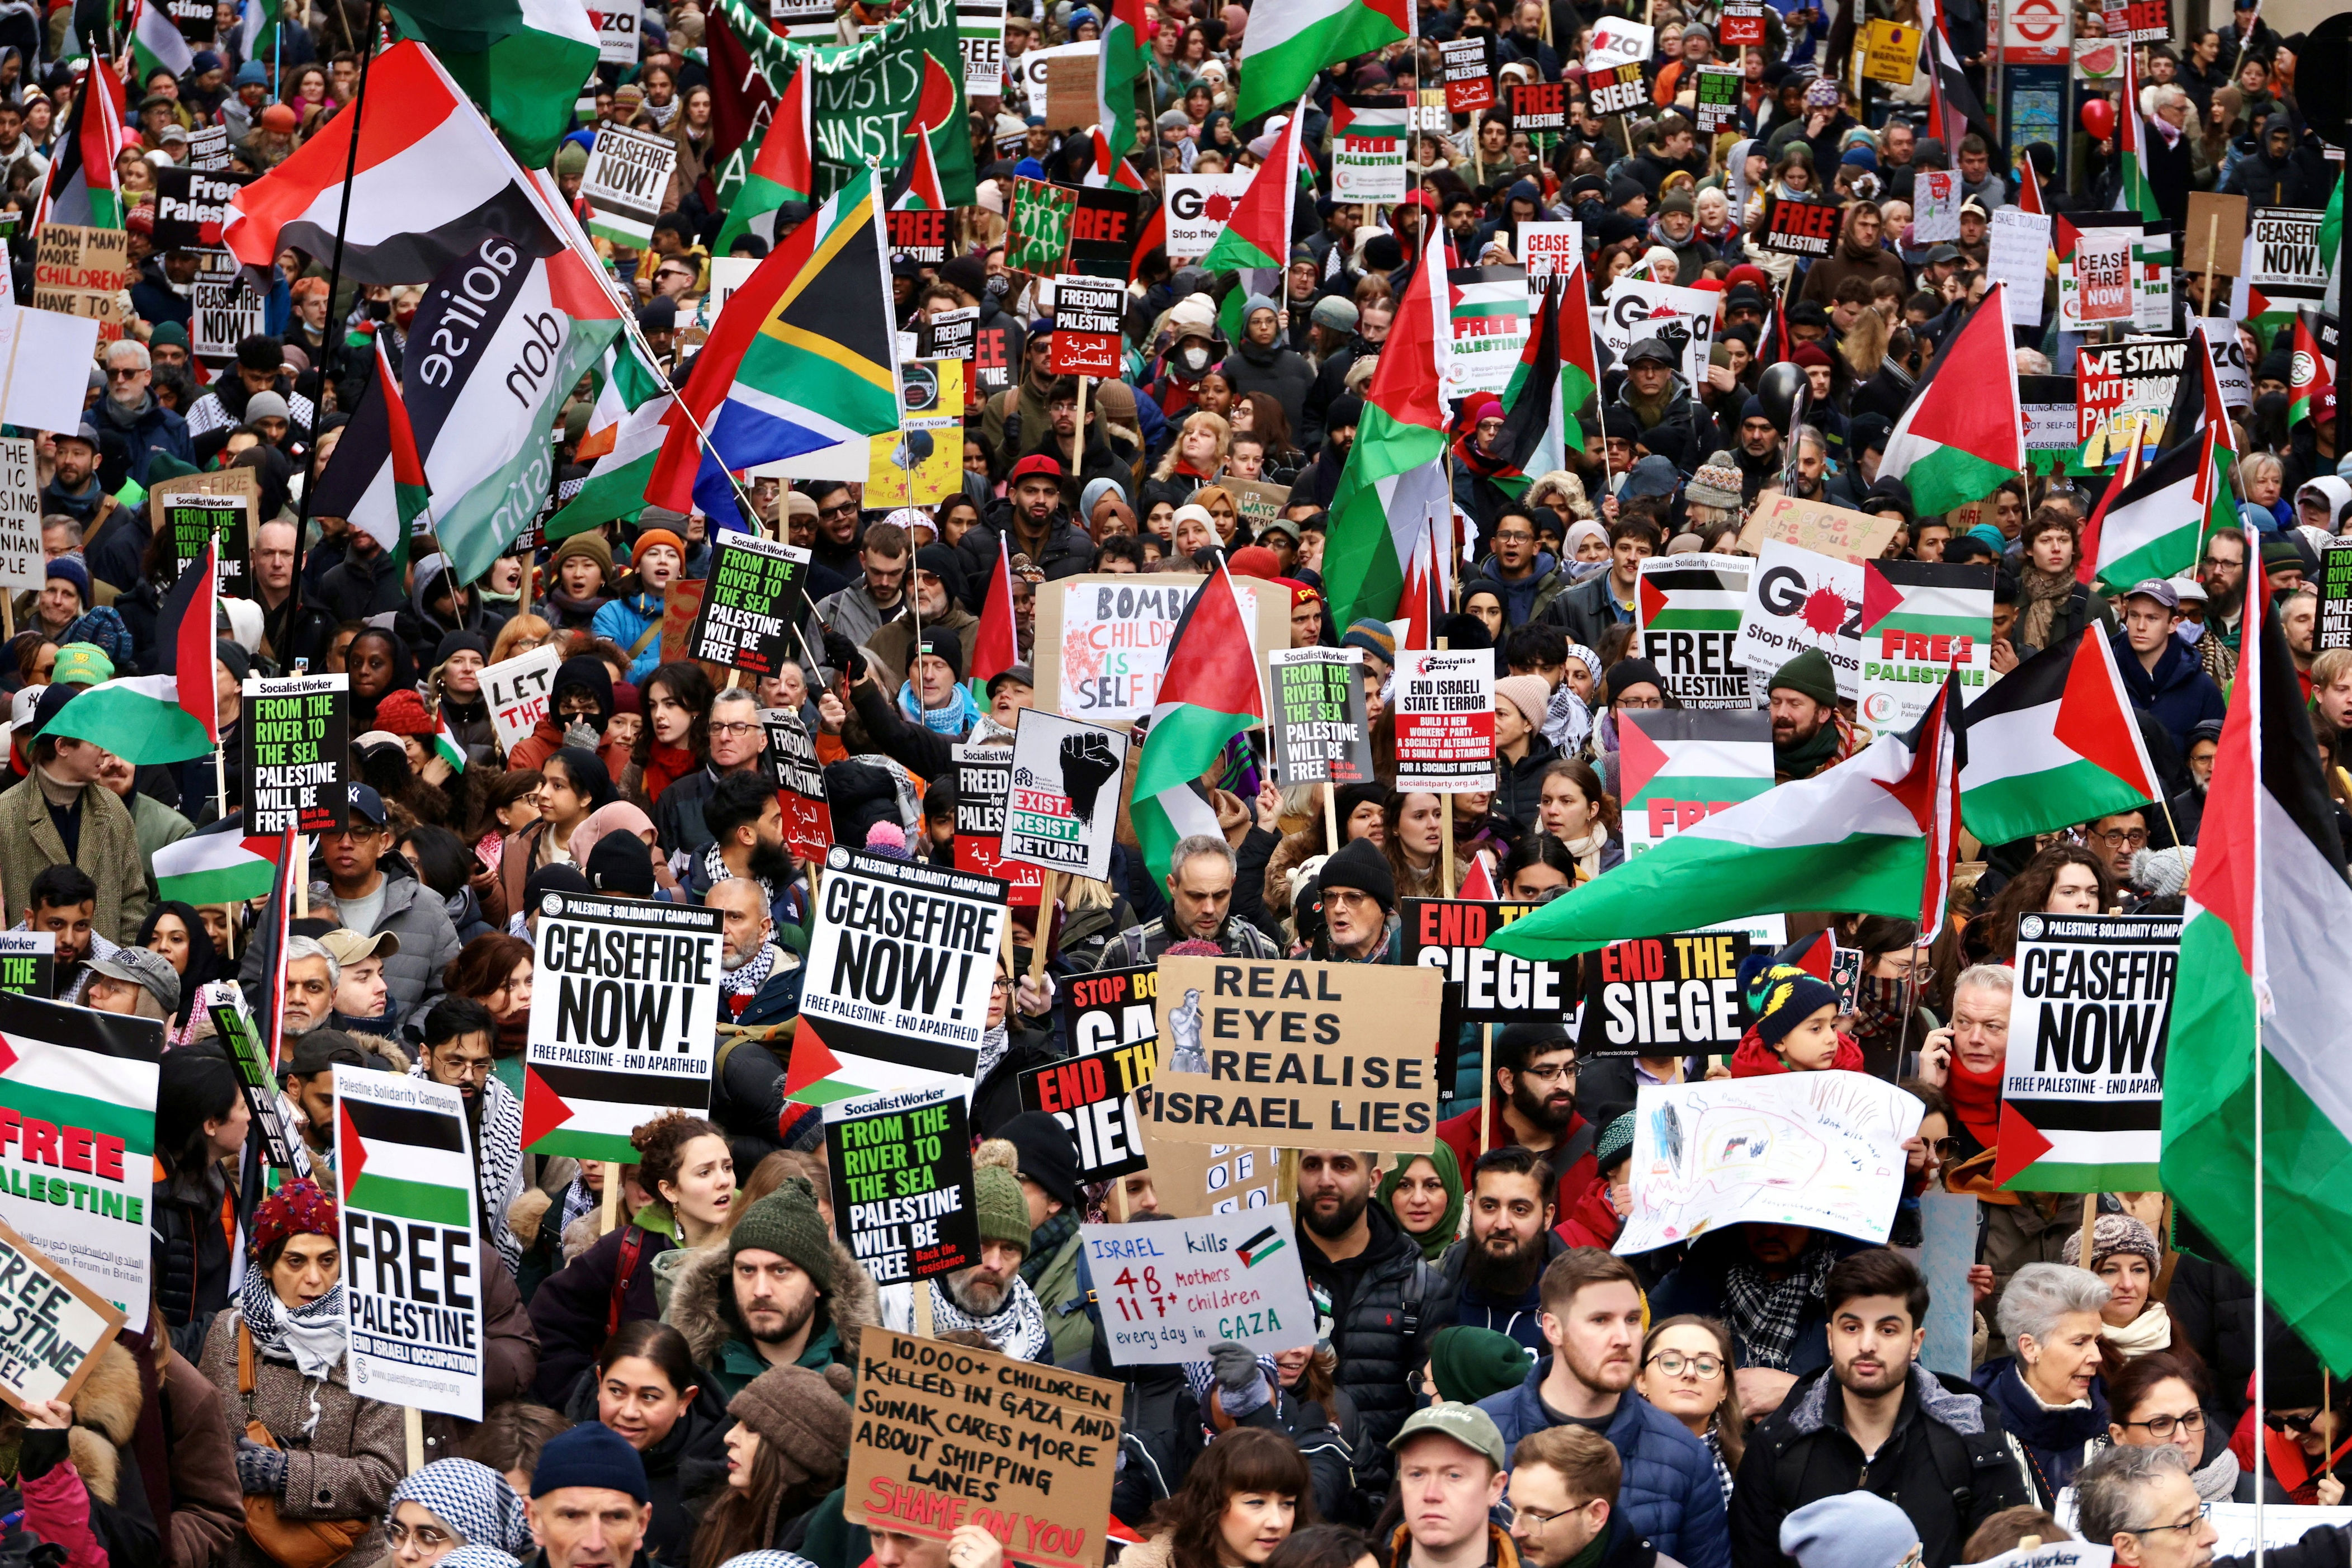 thousands attend pro-palestine protest as police warn of crackdown on slogans